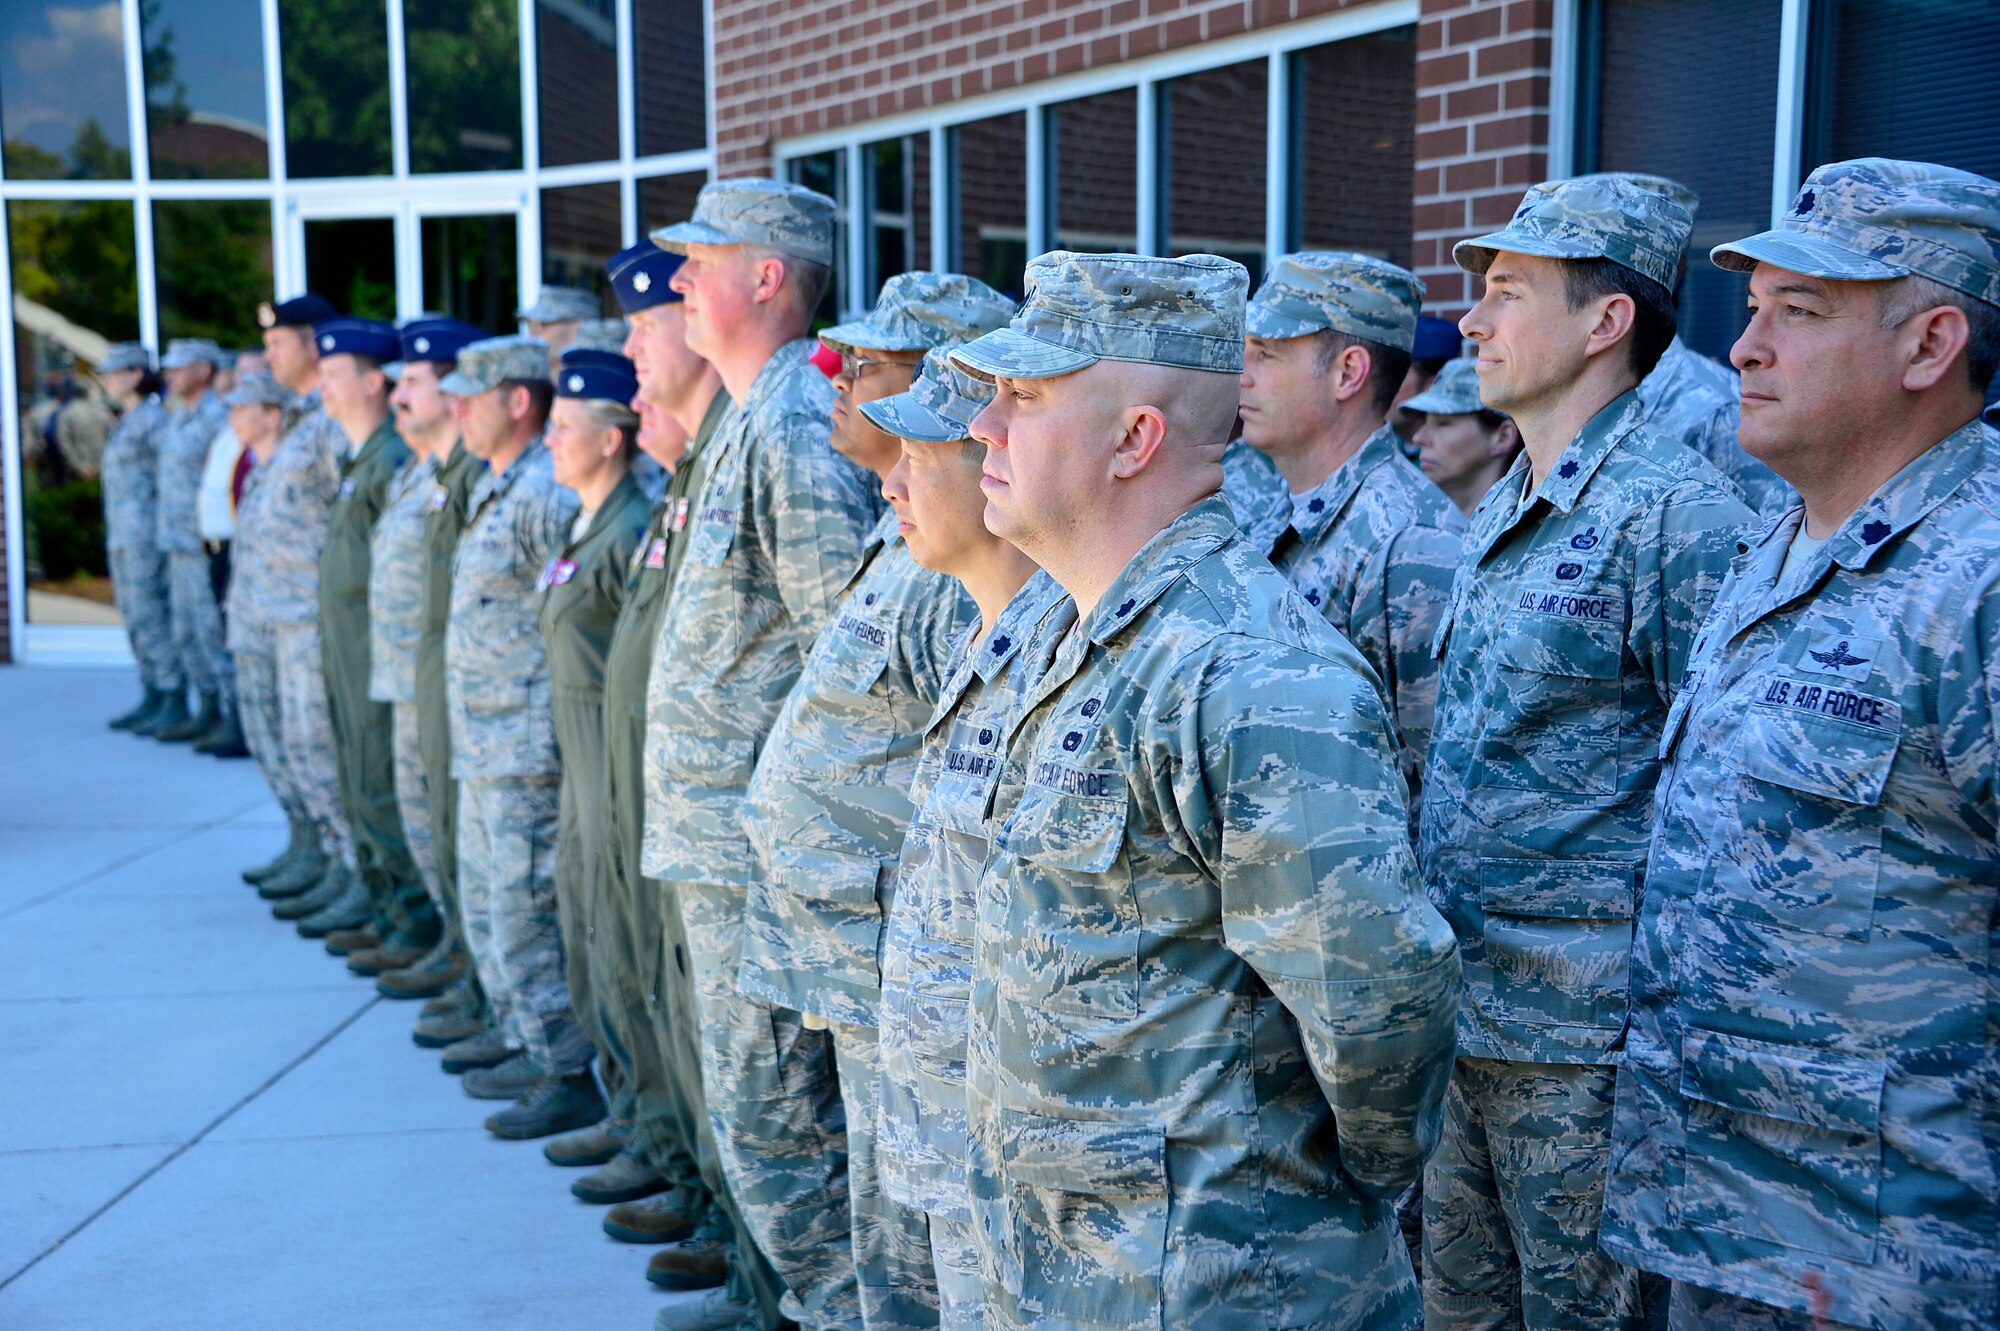 MCGHEE TYSON AIR NATIONAL GUARD BASE, Tenn. - Officers studying with Air War College at the I.G. Brown Training and Education Center here June 4, 2015, form up with NCO academy students , instructors and the Commander, among other guests and staff, for the day's afternoon retreat. The officers arrived here this week in AWC's fourth seminar on campus for Air National Guard and Air Force Reserve Command officers, as well as one Marine Corps officer. (U.S. Air National Guard photo by Master Sgt. Mike R. Smith/Released)  